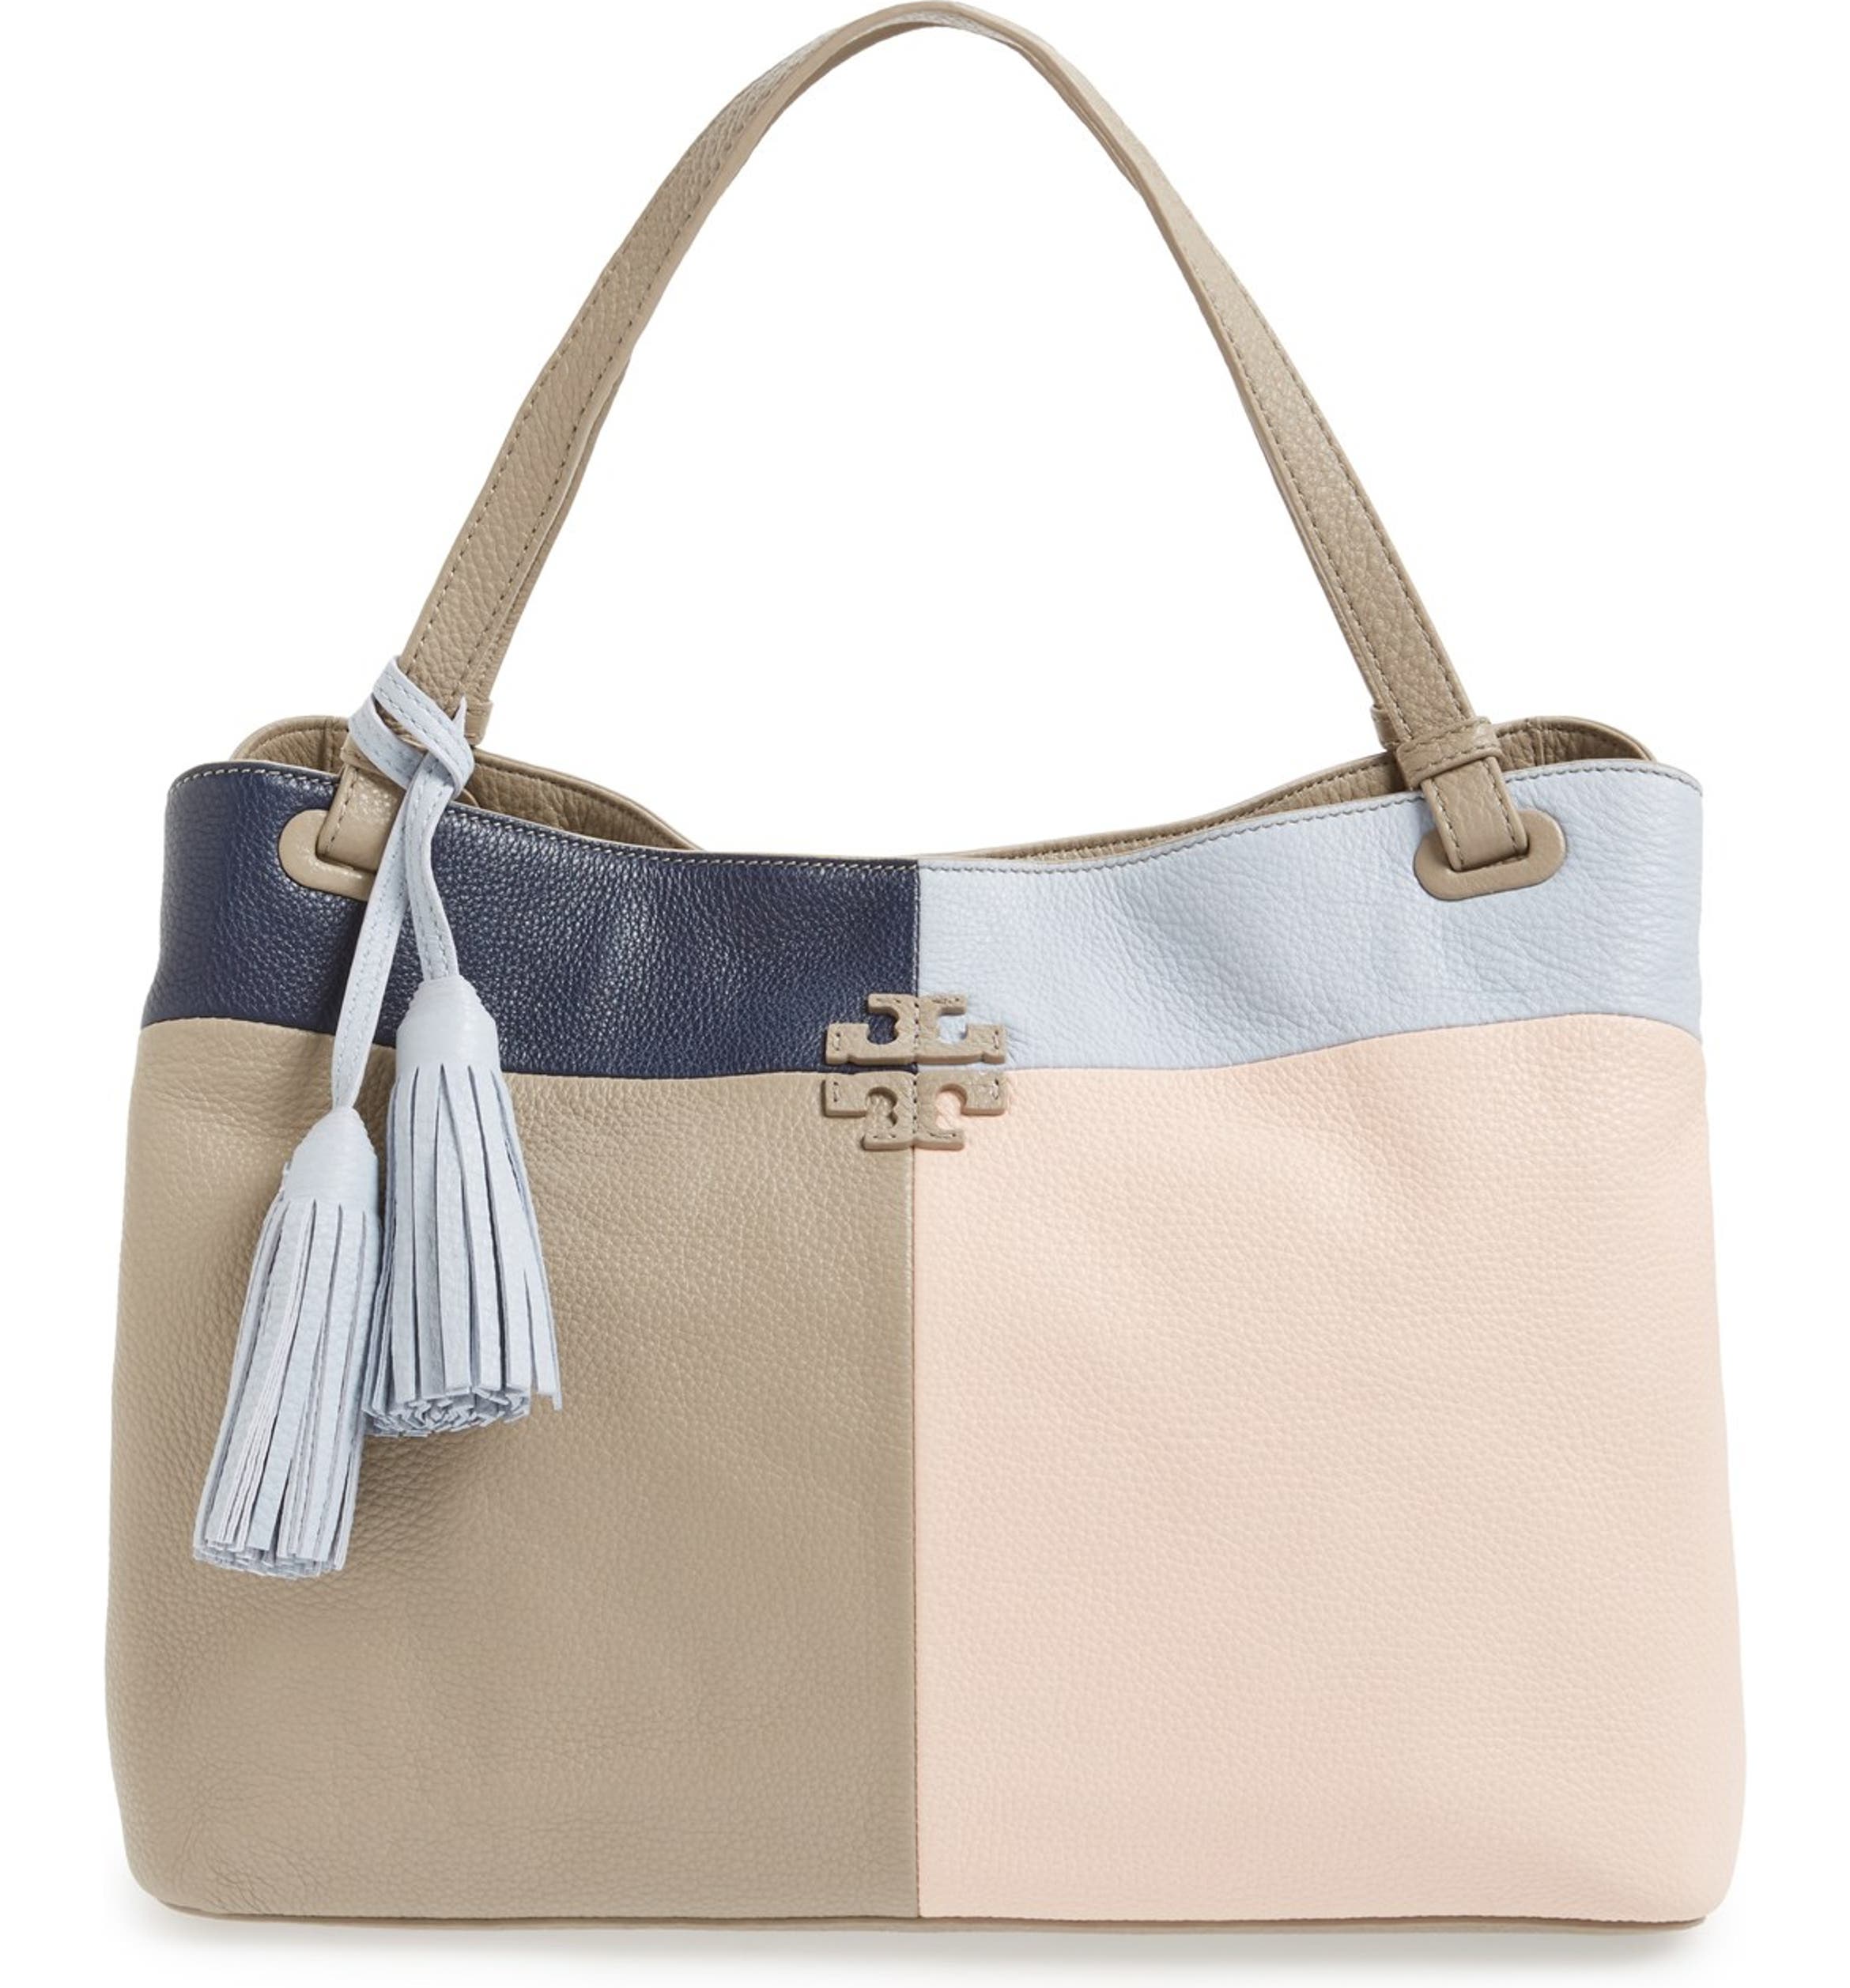 Tory Burch 'Thea' Patchwork Tote | Nordstrom